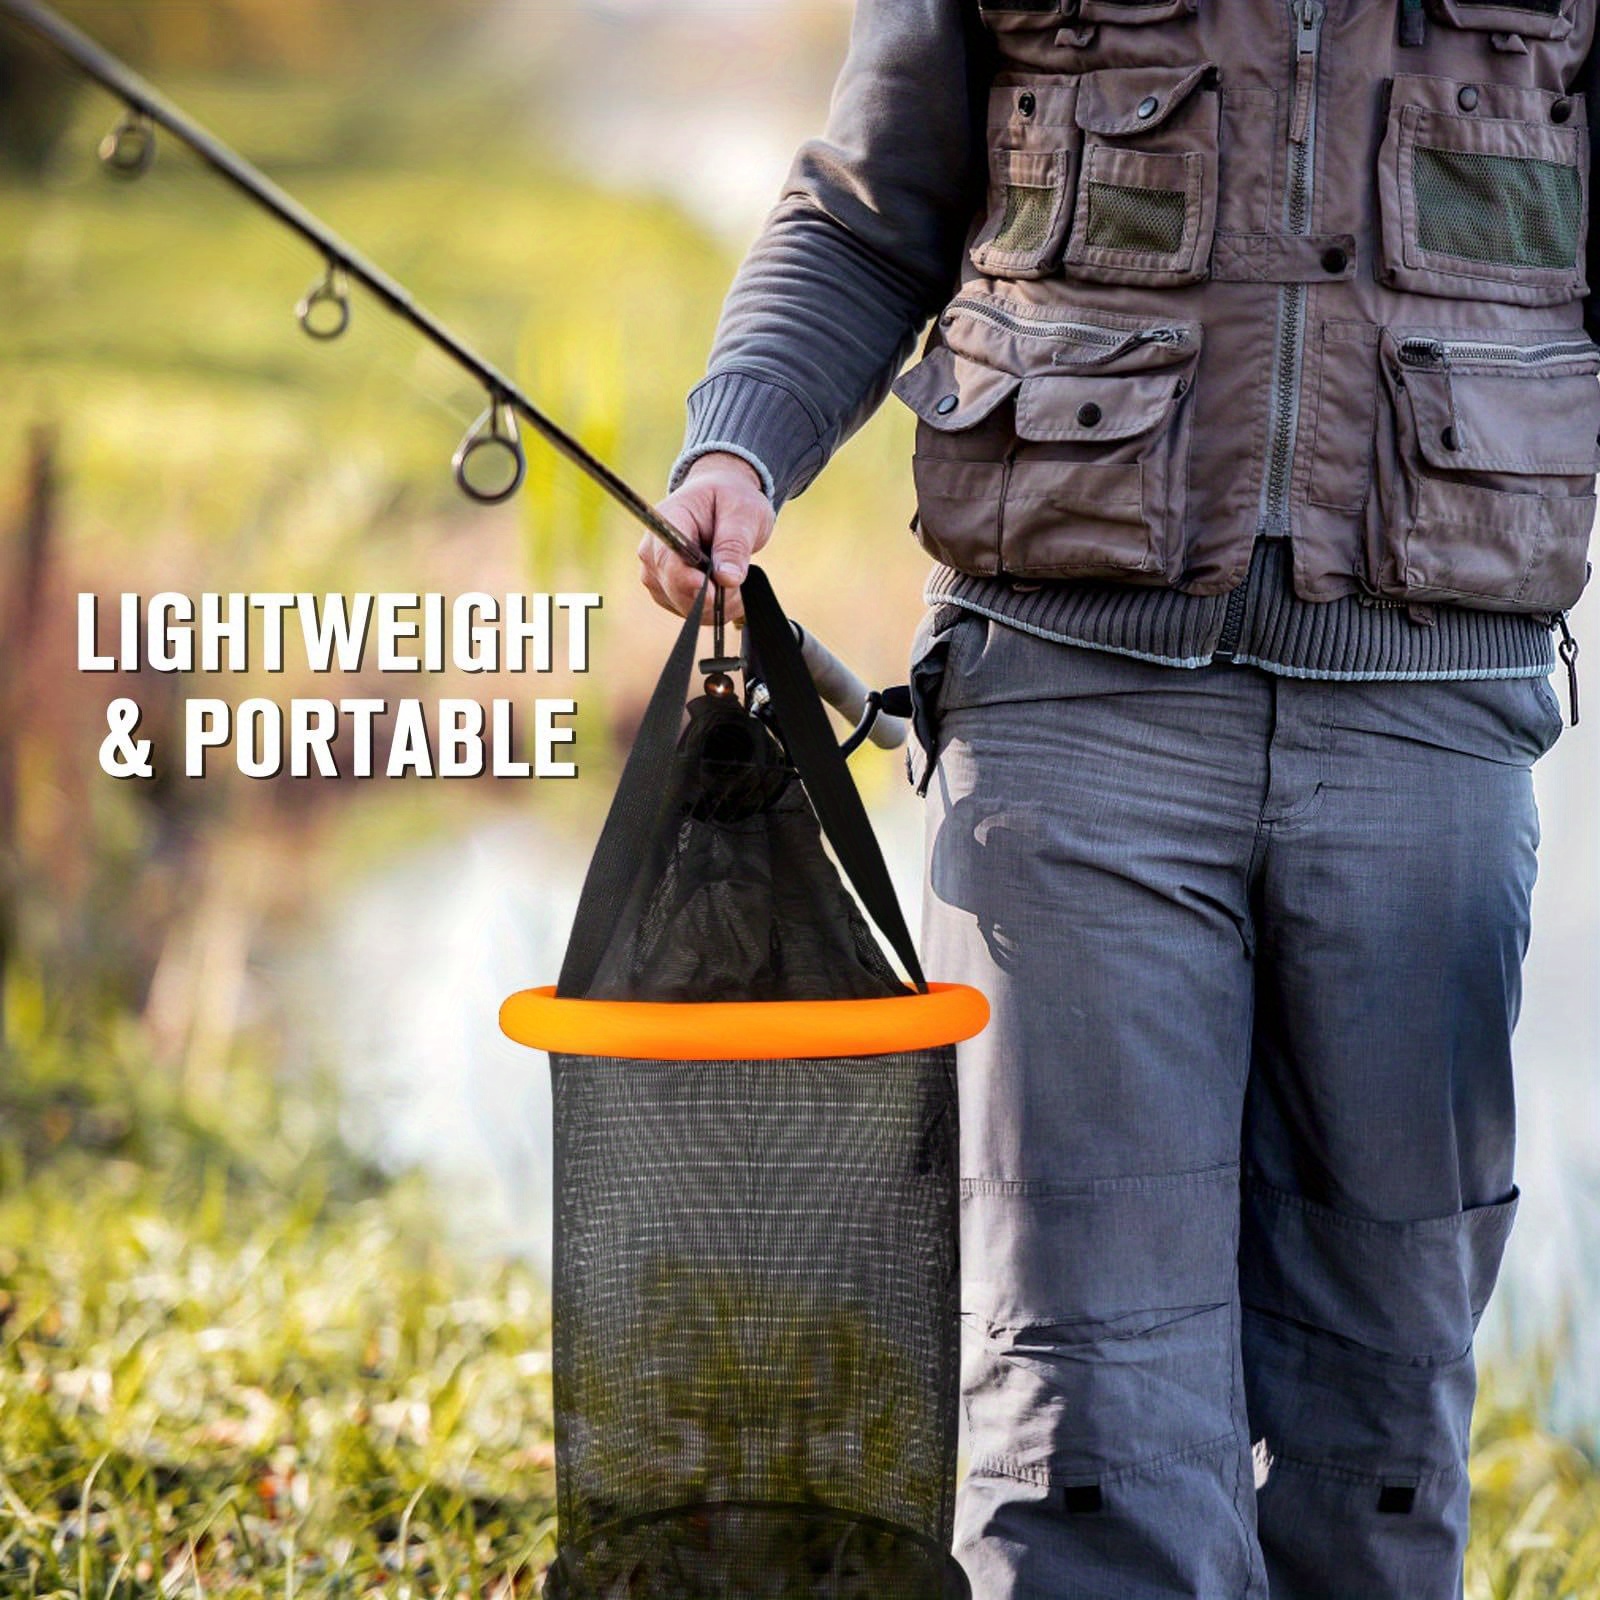 Portable Fishing Basket - Foldable Nylon-Mesh Net for Keeping Crayfish,  Minnows, Leaches & Other Live Baits